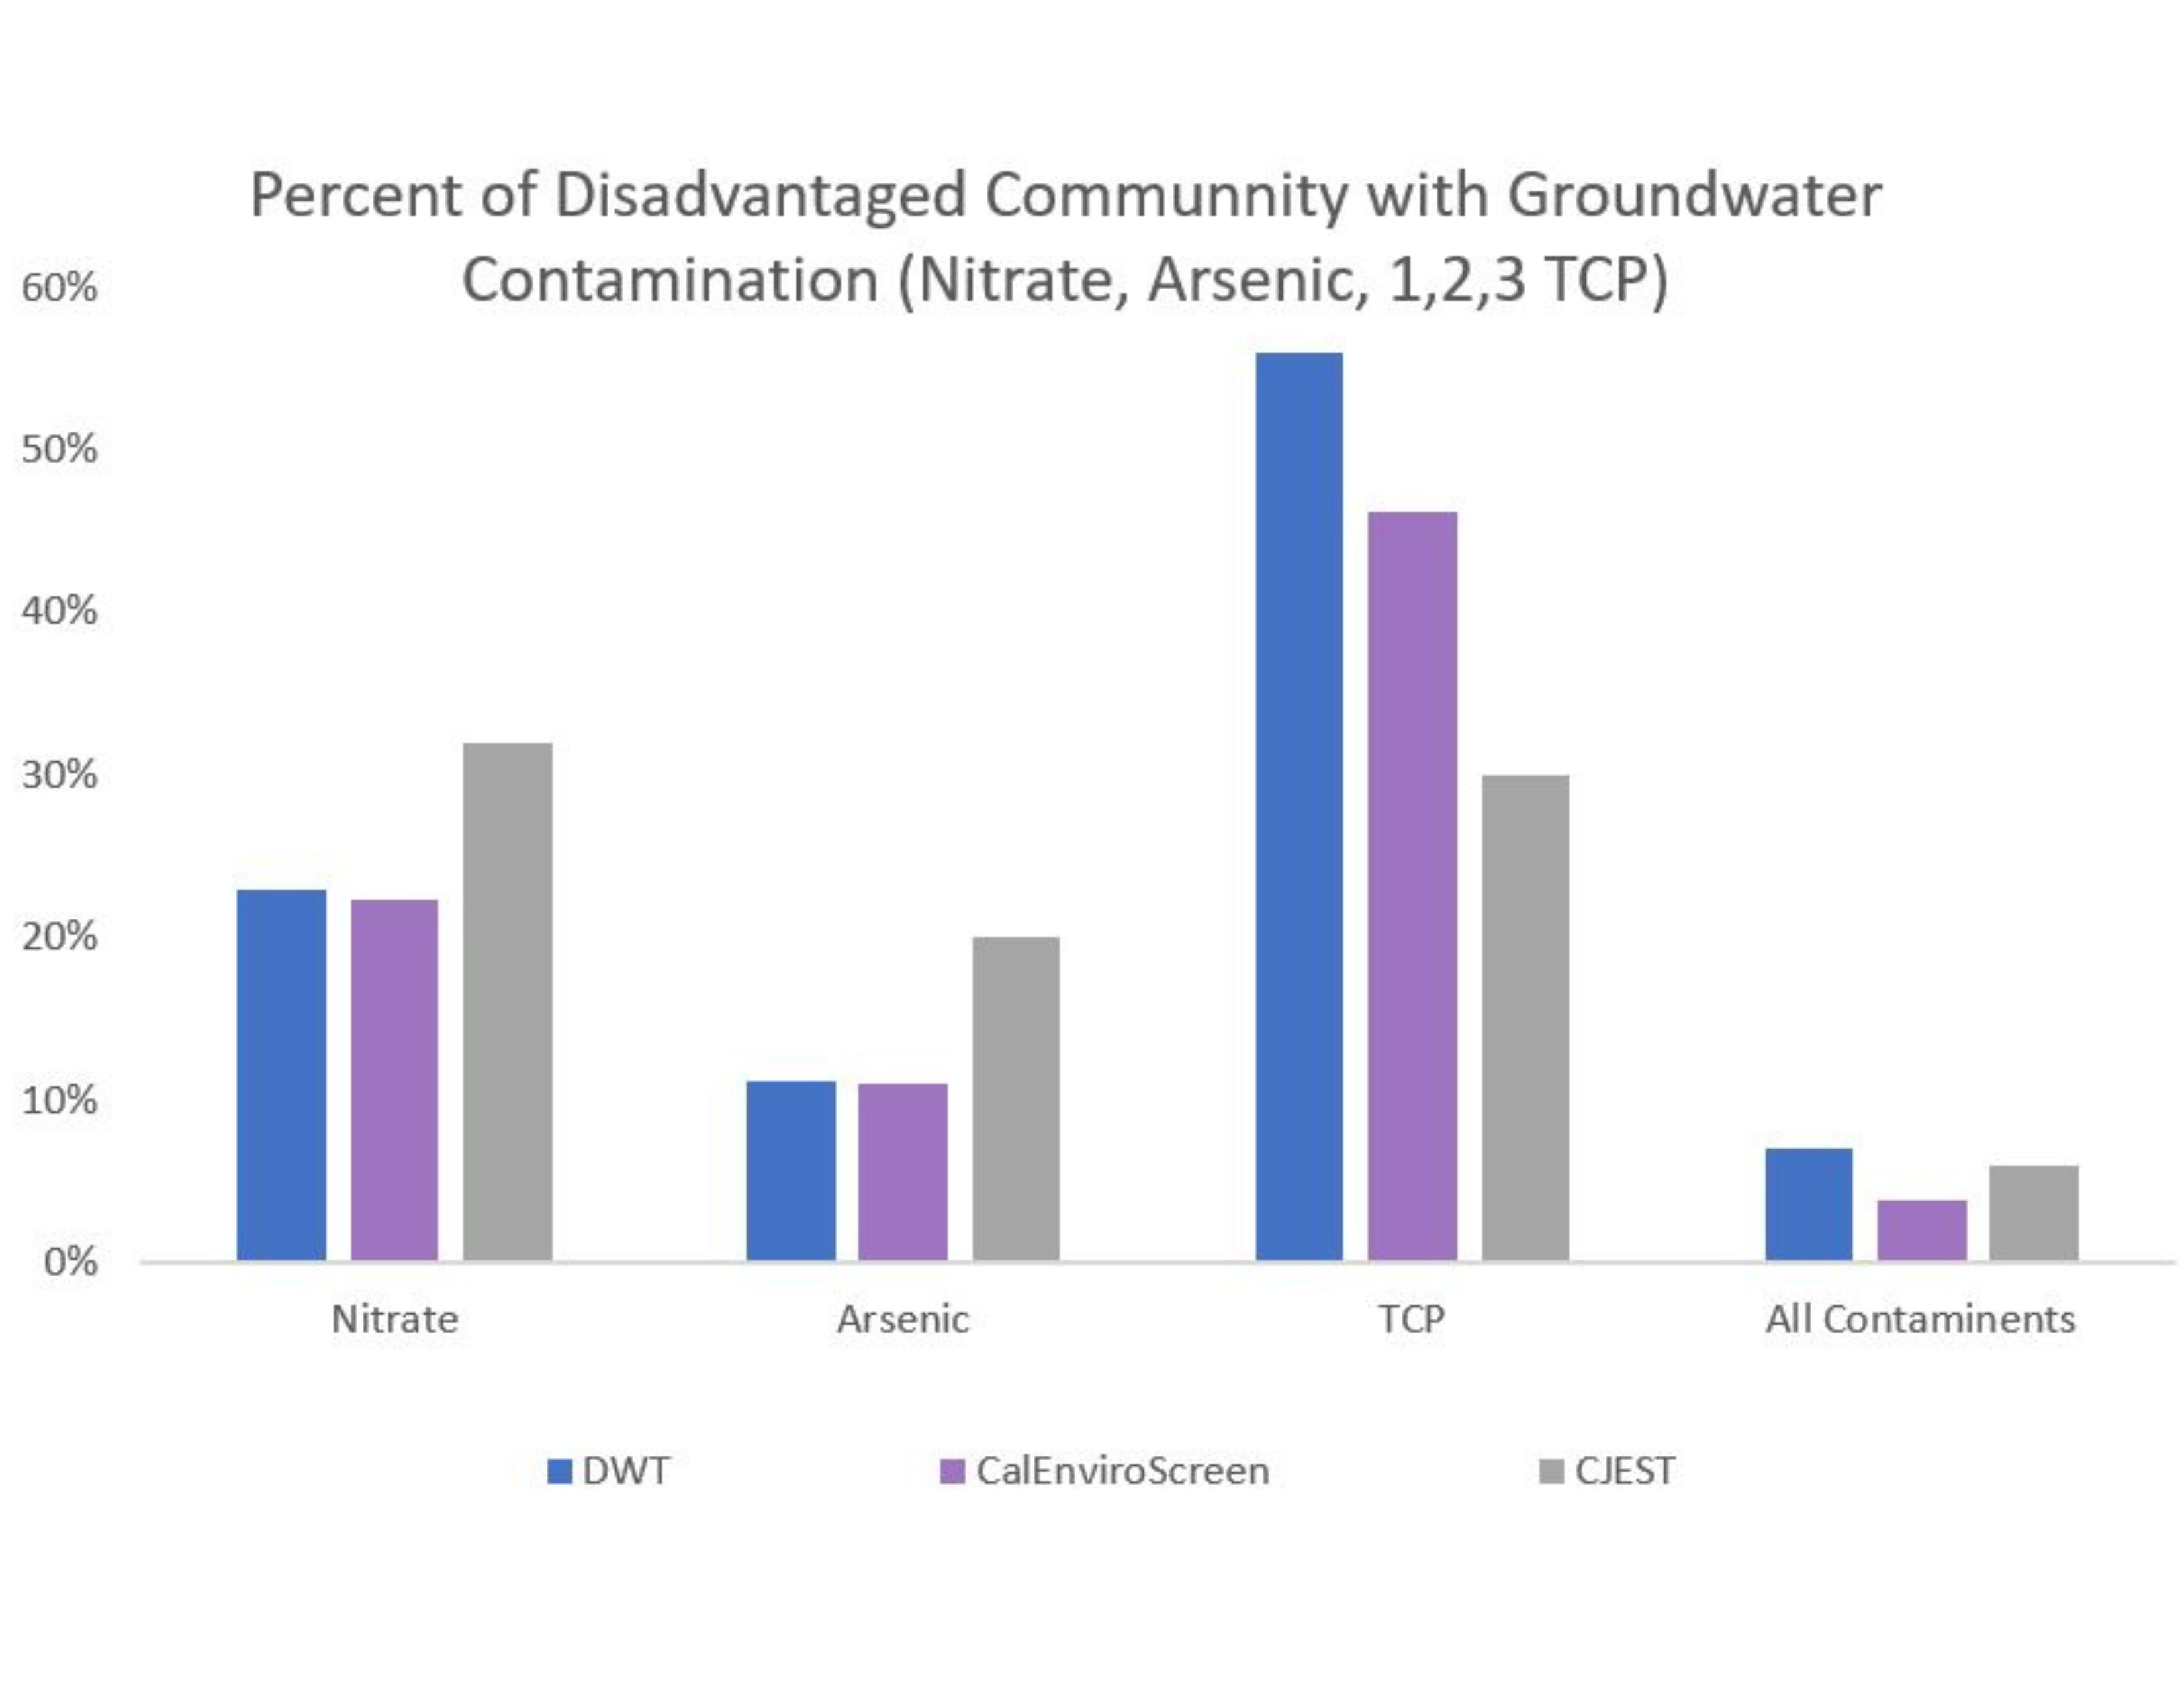 Proportion of Disadvantaged Communities Subject to Groundwater Contamination by Different Definitions of Disadvantaged 